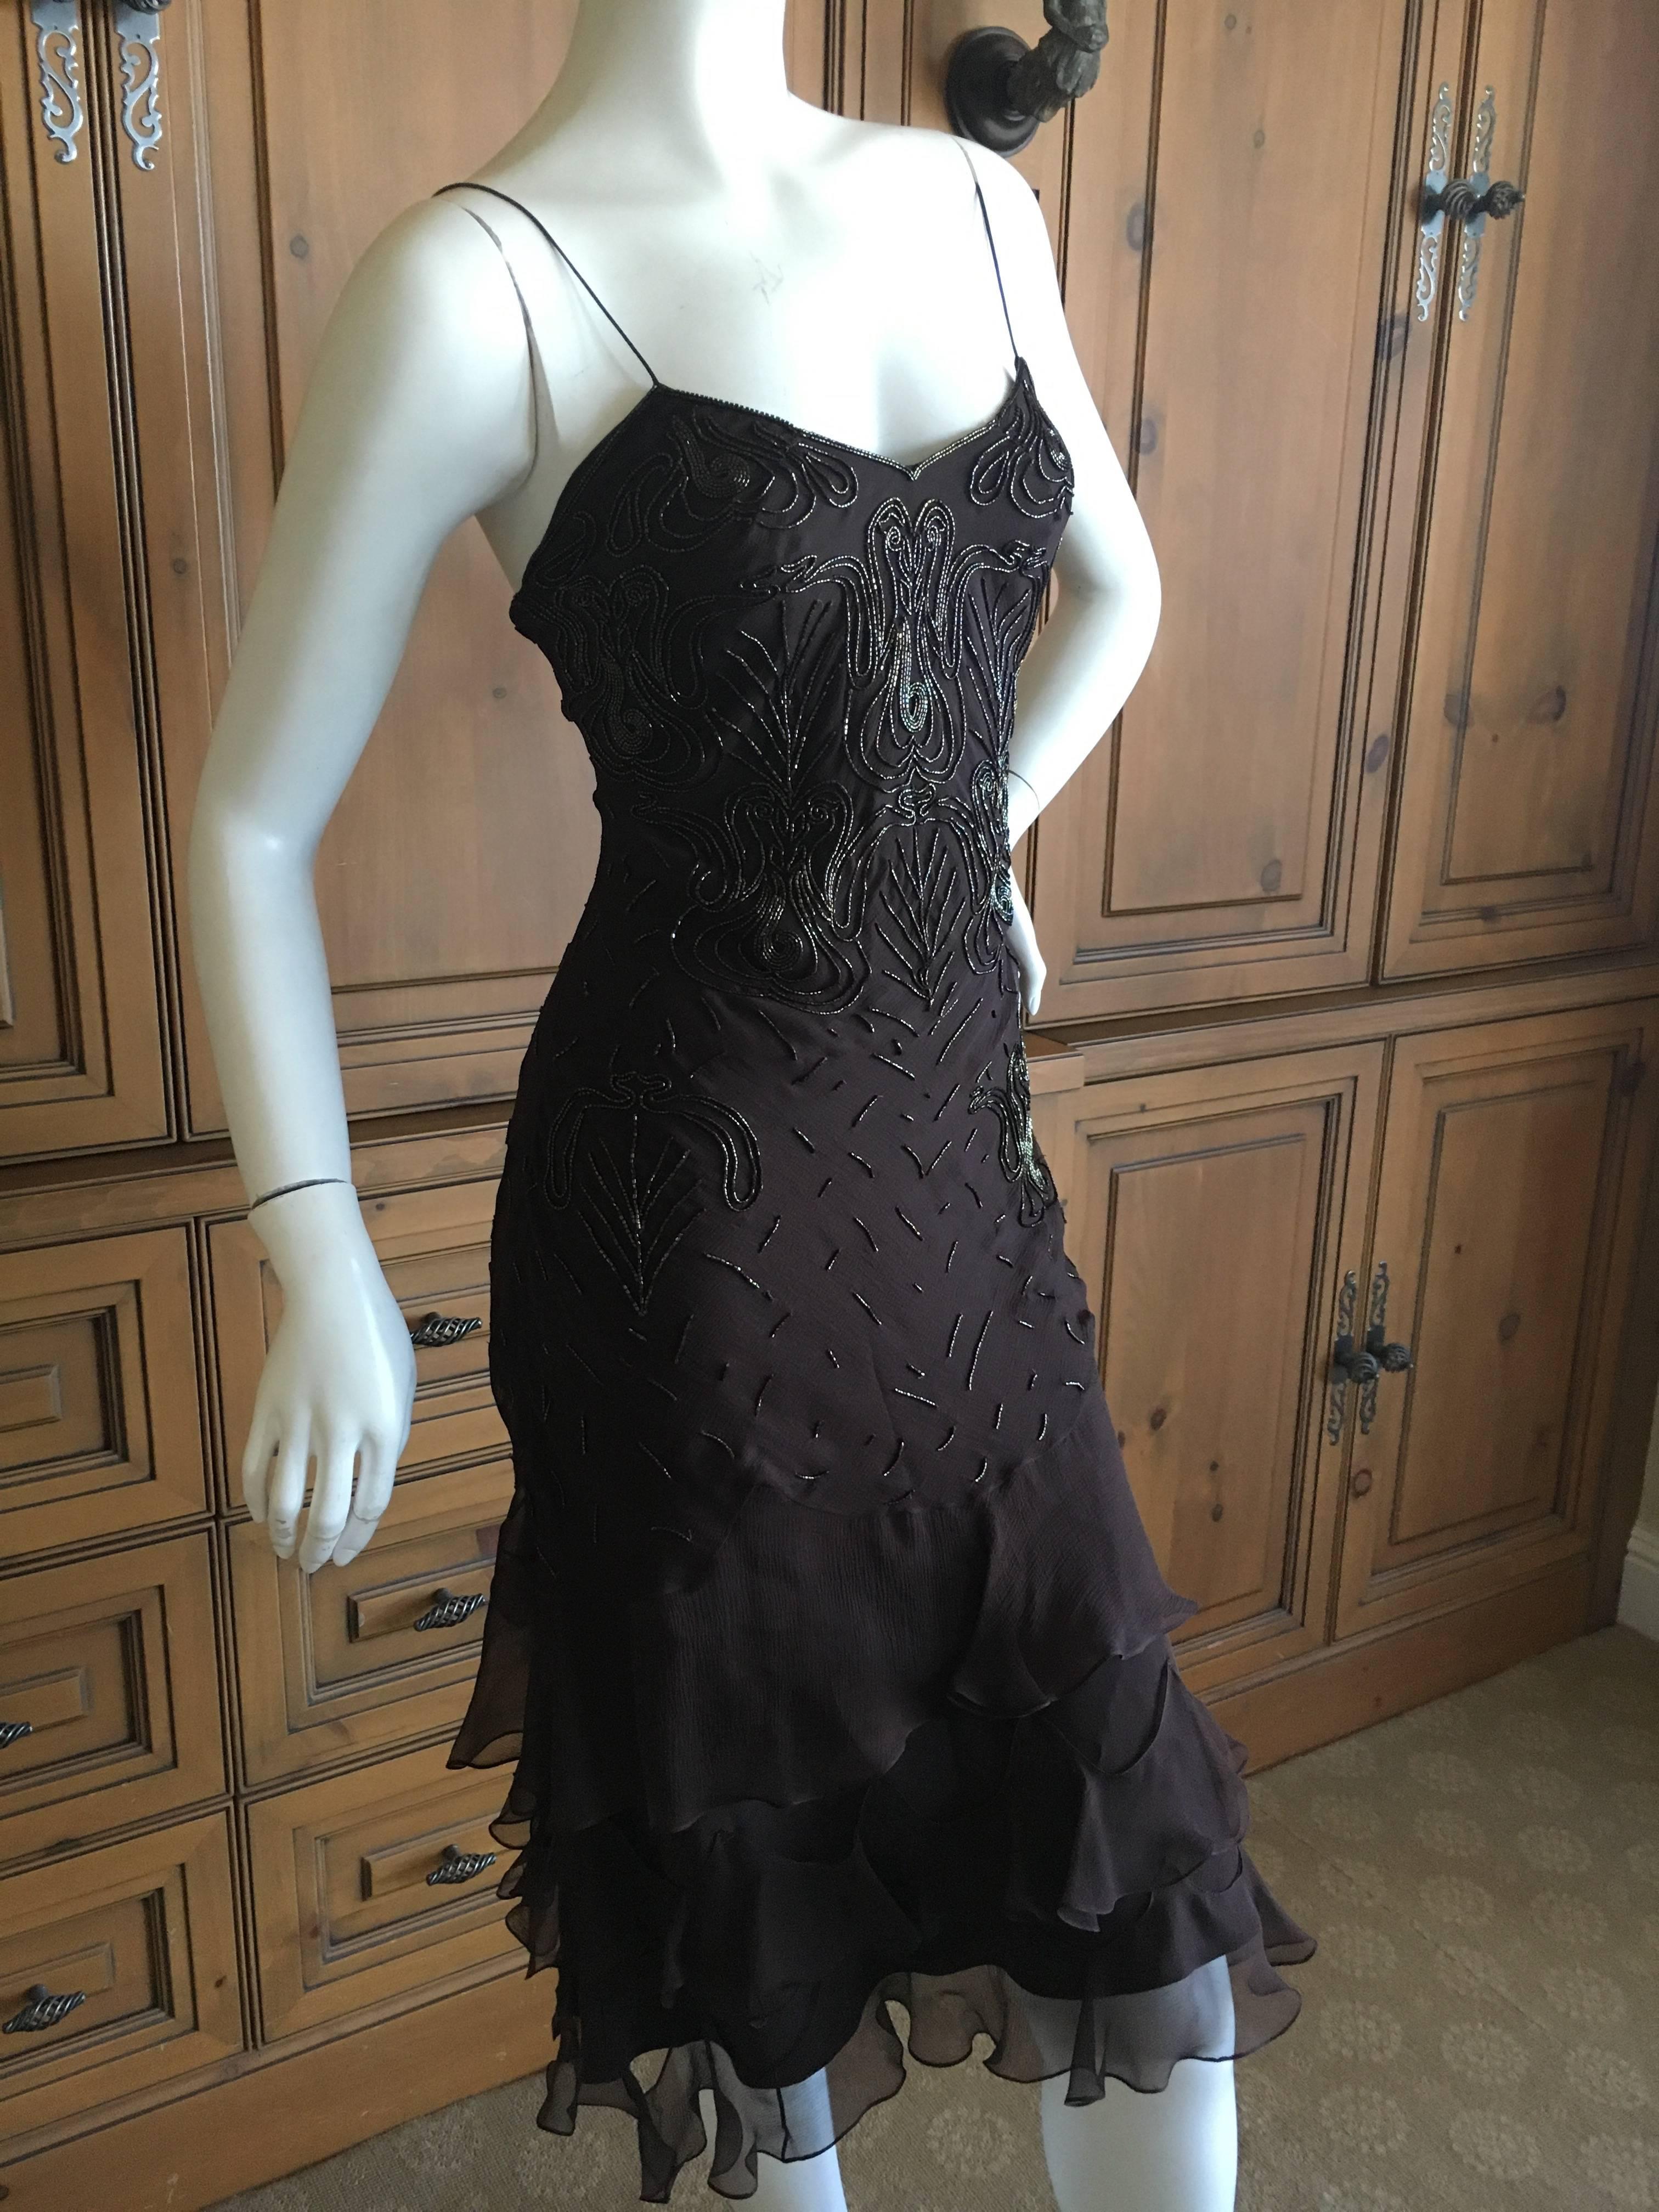 Christian Dior Bead Embellished Silk Chiffon Cocktail Dress by John Galliano  For Sale 3